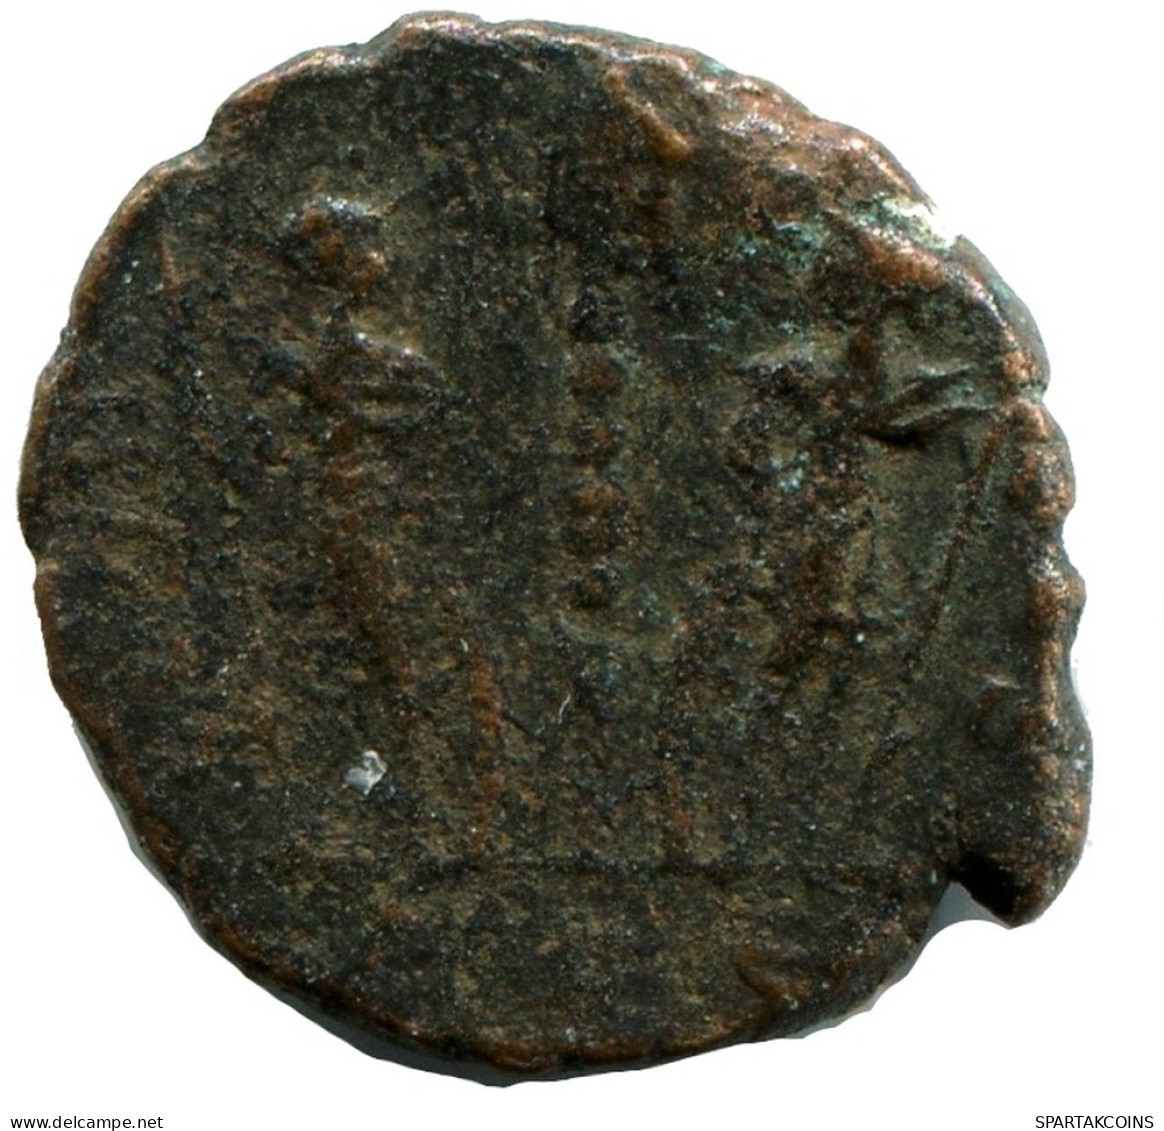 CONSTANS MINTED IN ROME ITALY FROM THE ROYAL ONTARIO MUSEUM #ANC11510.14.E.A - L'Empire Chrétien (307 à 363)